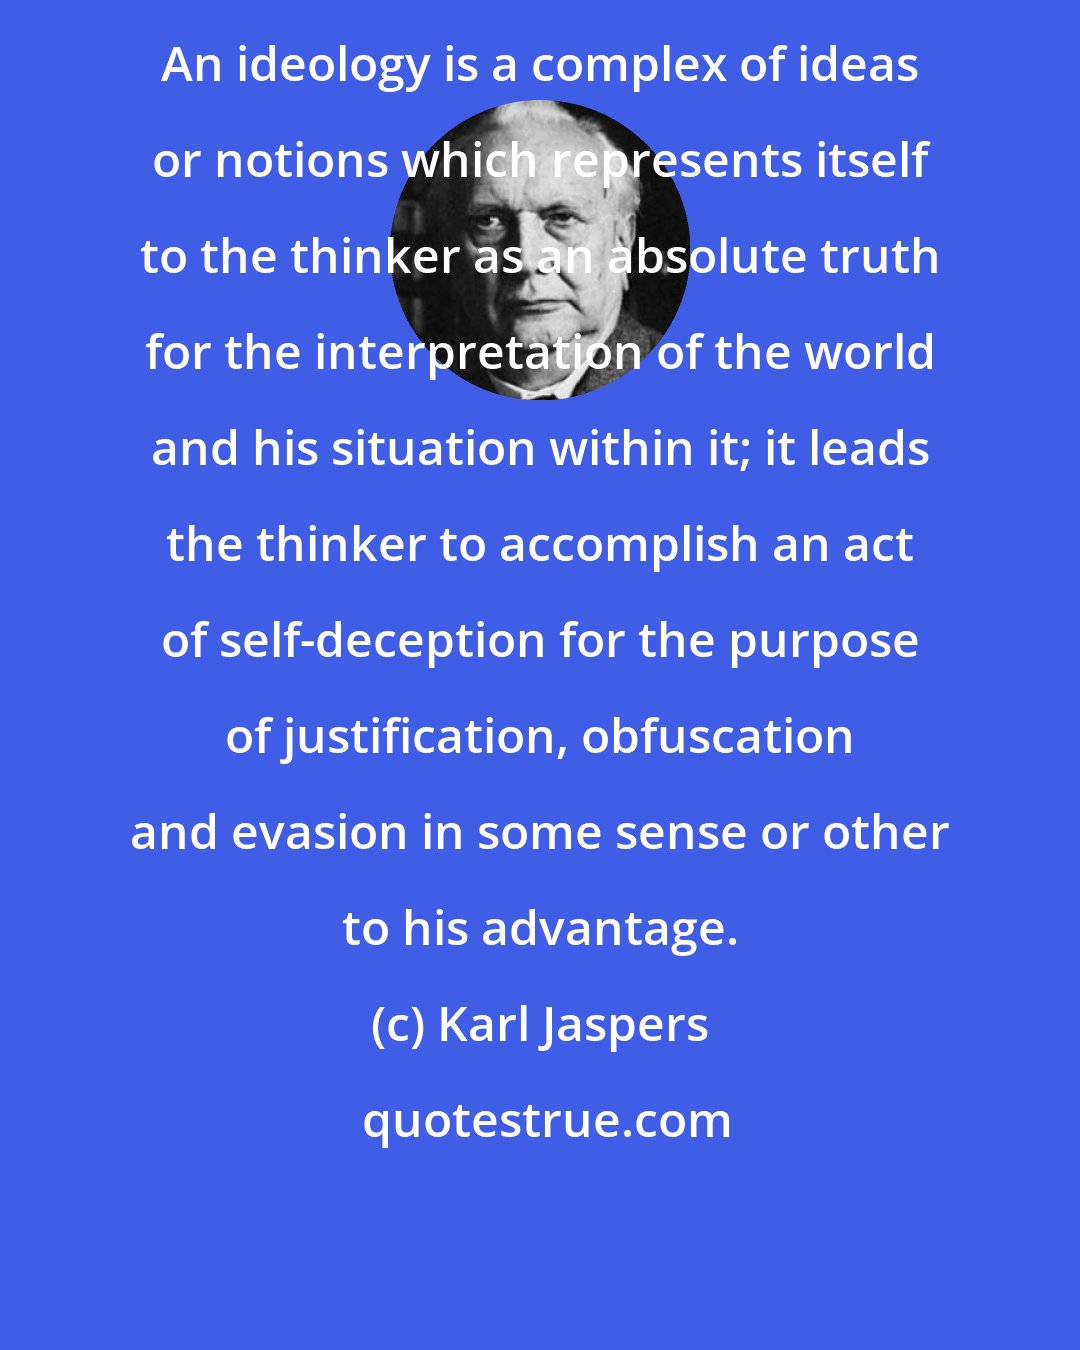 Karl Jaspers: An ideology is a complex of ideas or notions which represents itself to the thinker as an absolute truth for the interpretation of the world and his situation within it; it leads the thinker to accomplish an act of self-deception for the purpose of justification, obfuscation and evasion in some sense or other to his advantage.